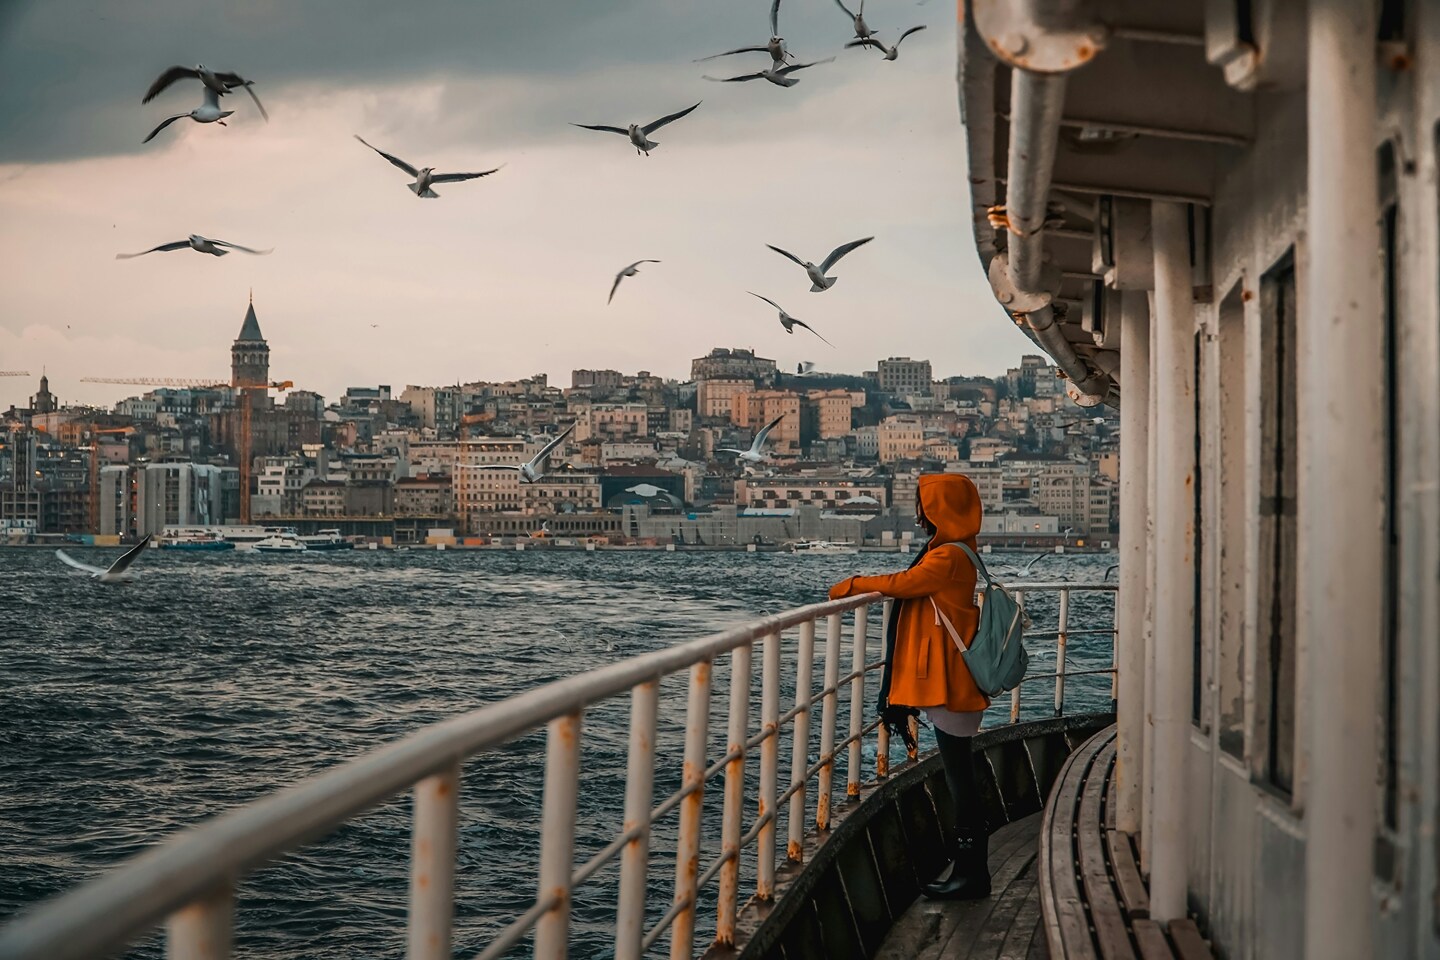 Person in an orange hooded jacket standing on a boat with the Istanbul skyline in the background and seagulls flying overhead